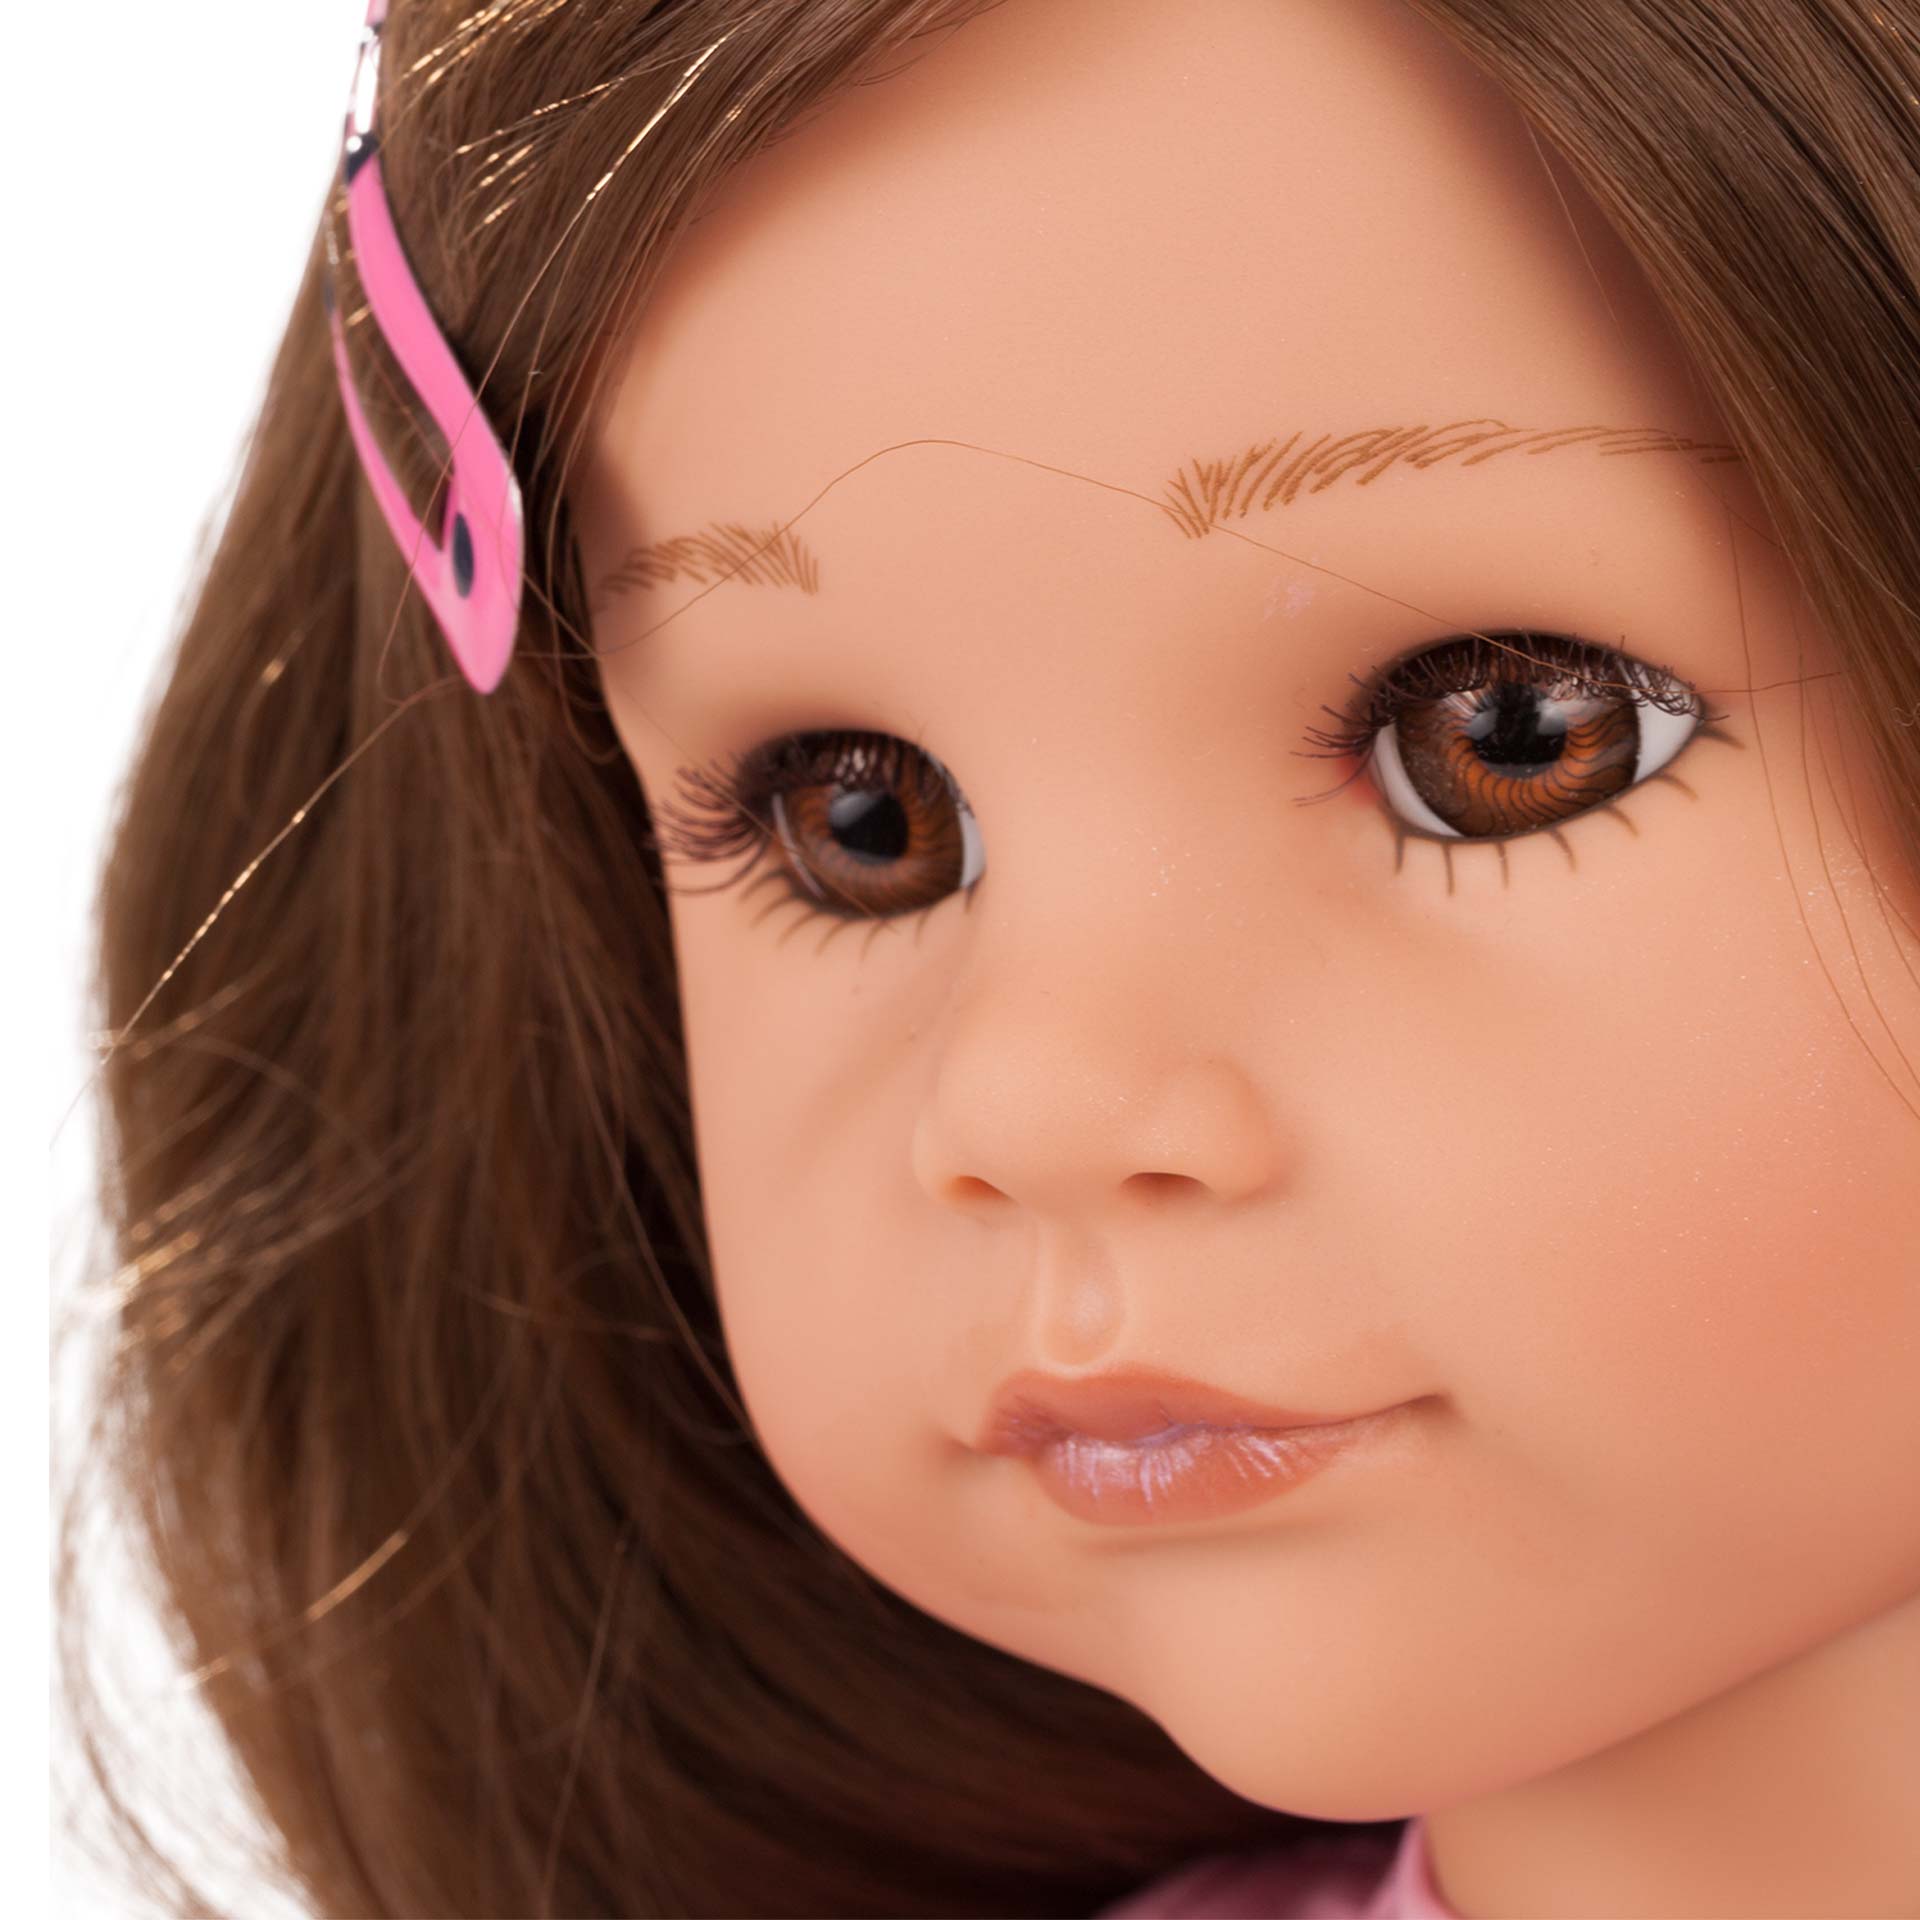 Hannah - staying over at her friend - Dolls and Accessories